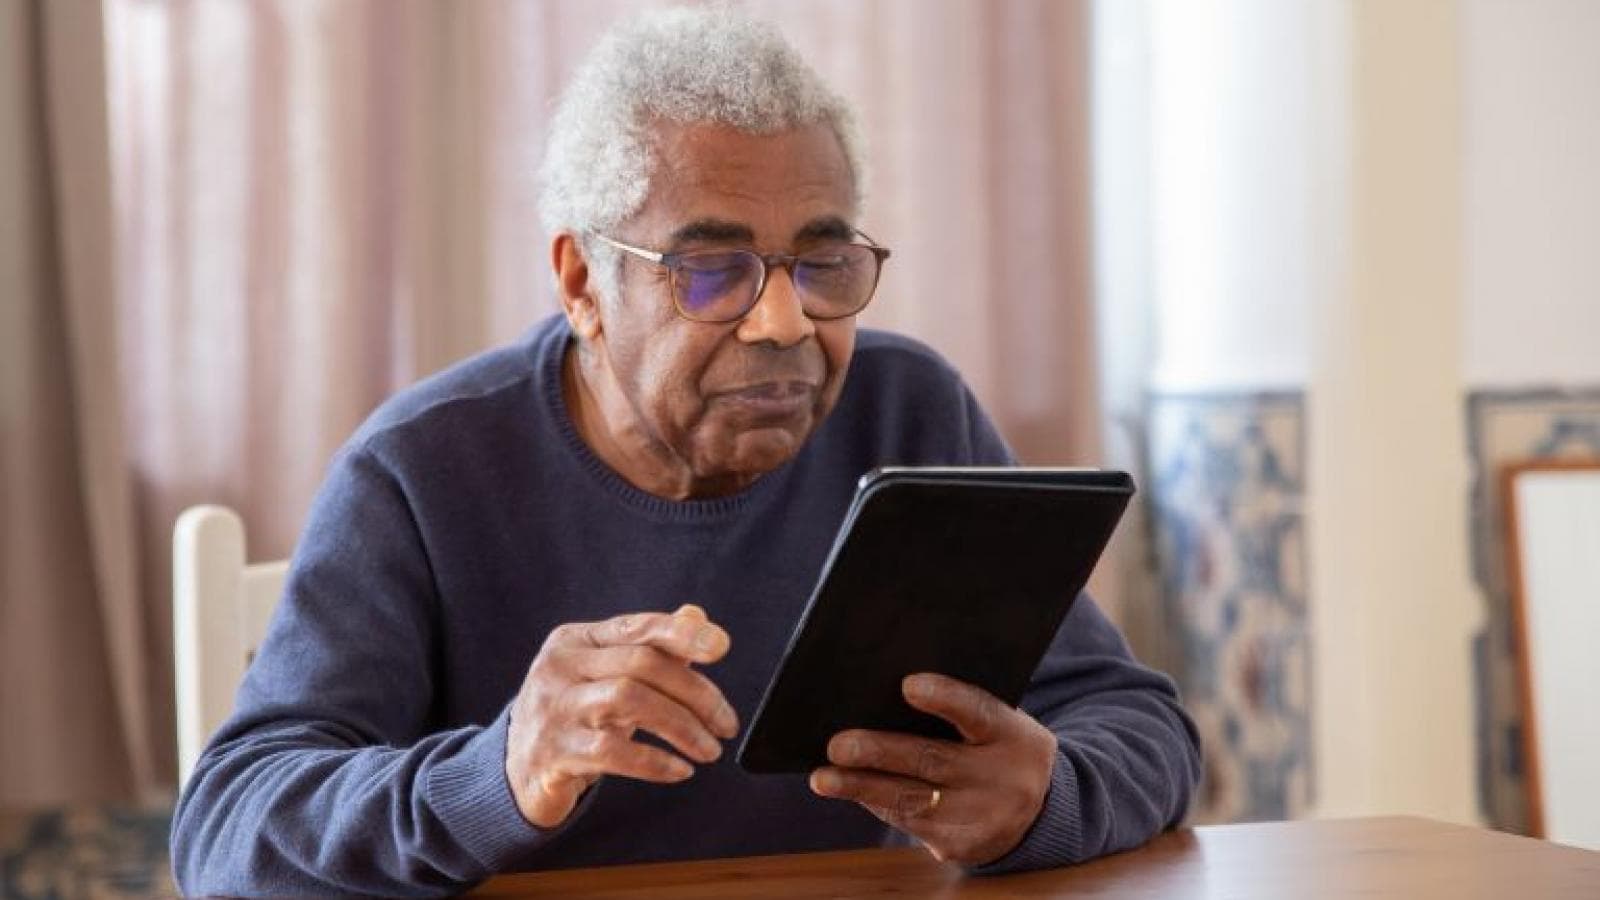 older man sitting at table looking at a tablet - stock image